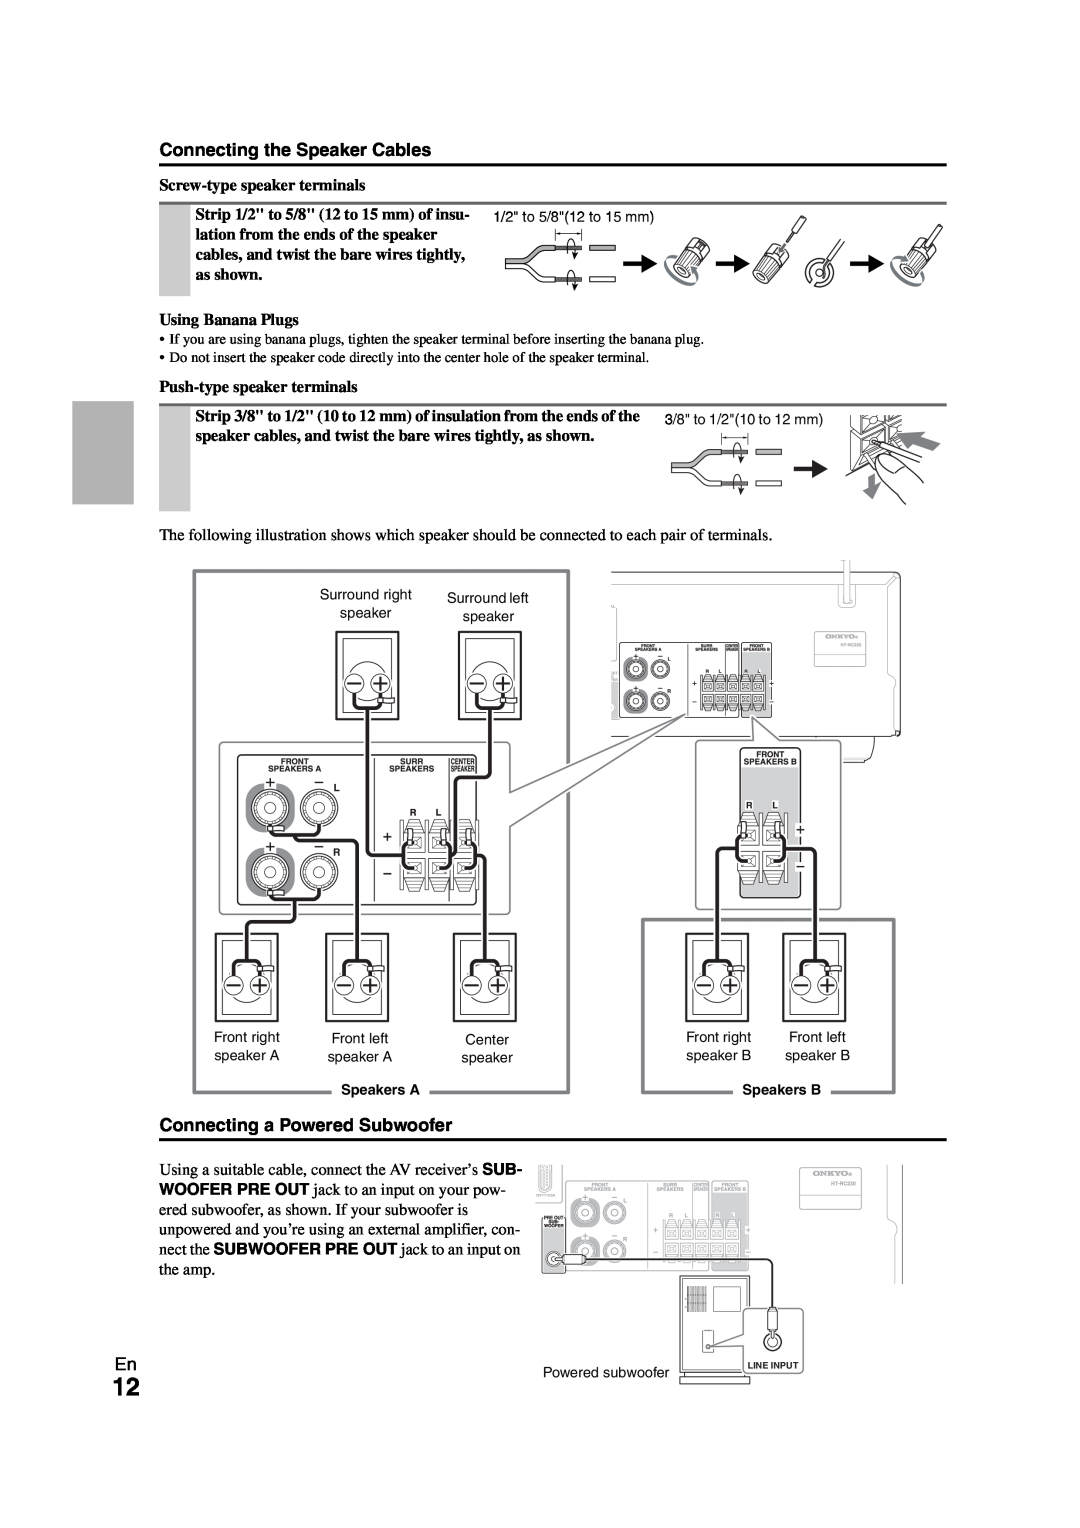 Onkyo 29400468 instruction manual Connecting the Speaker Cables, Connecting a Powered Subwoofer 